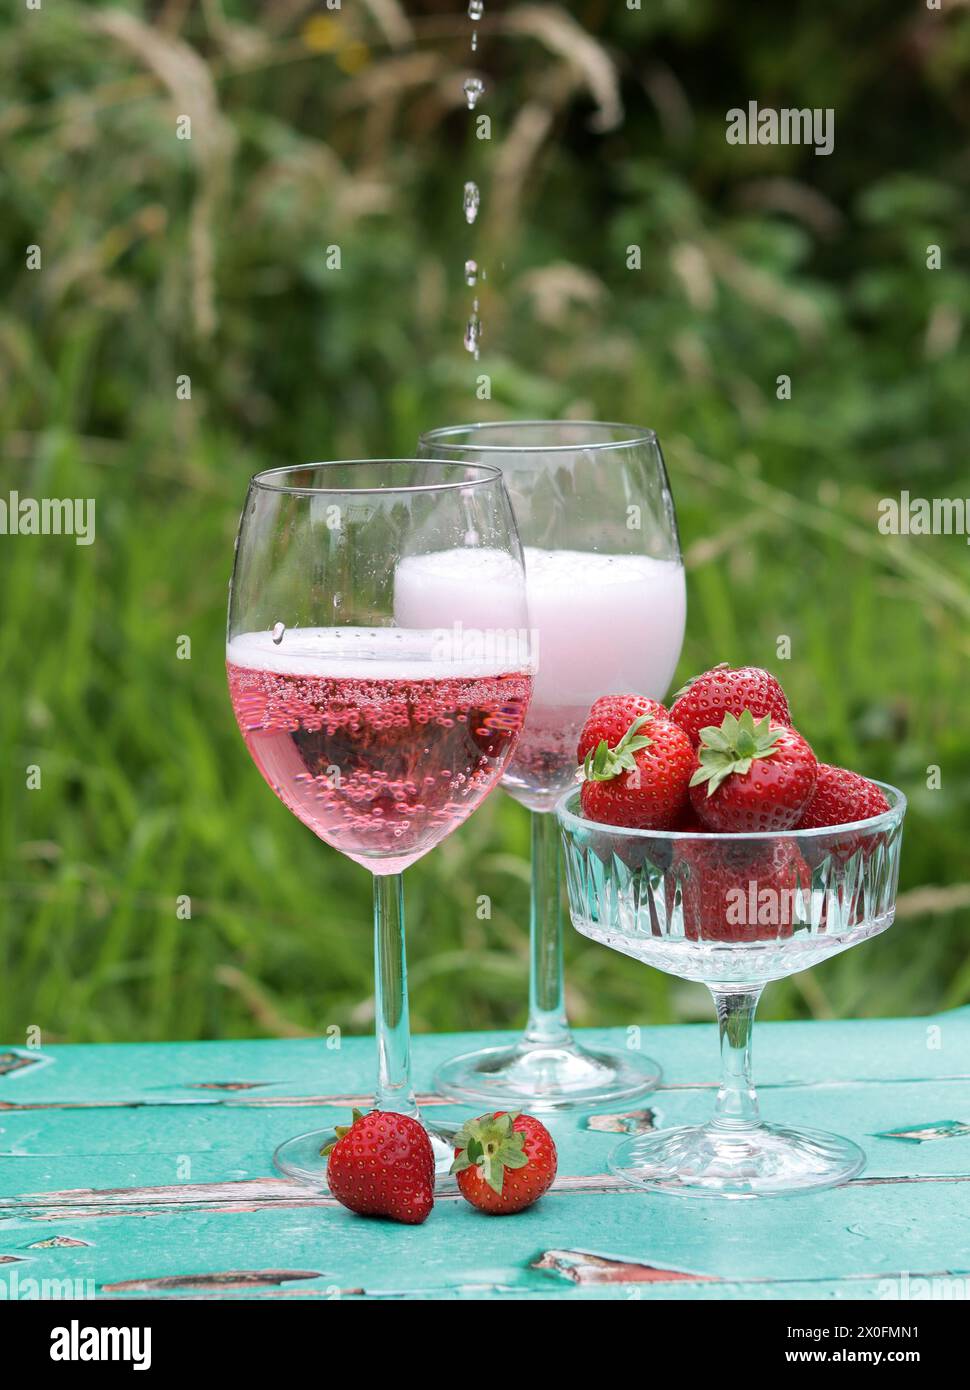 Two glasses of rose sparkling wine and strawberry on a  table. Romantic picnic outdoors. Close up photo of glass tableware. Summer drinks and food. Stock Photo